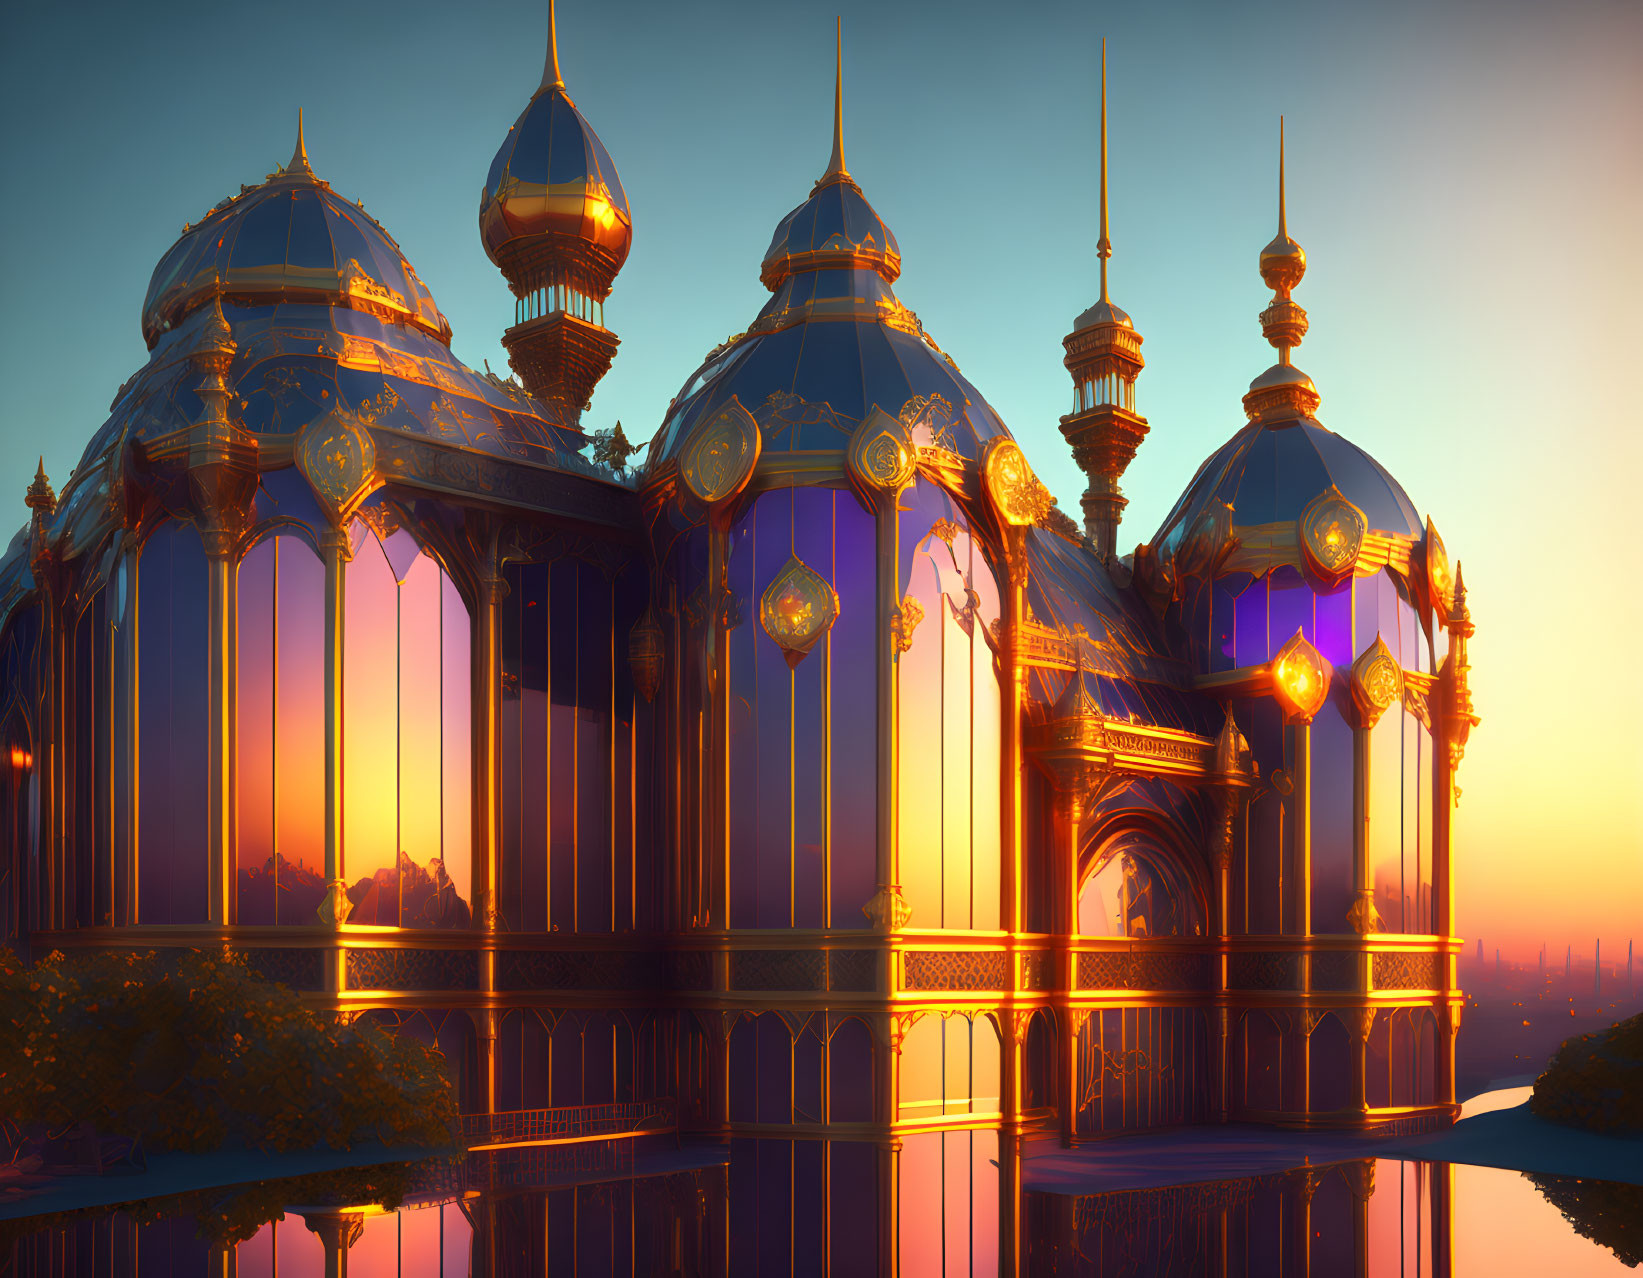 Ornate palace with domes at sunset over tranquil waters